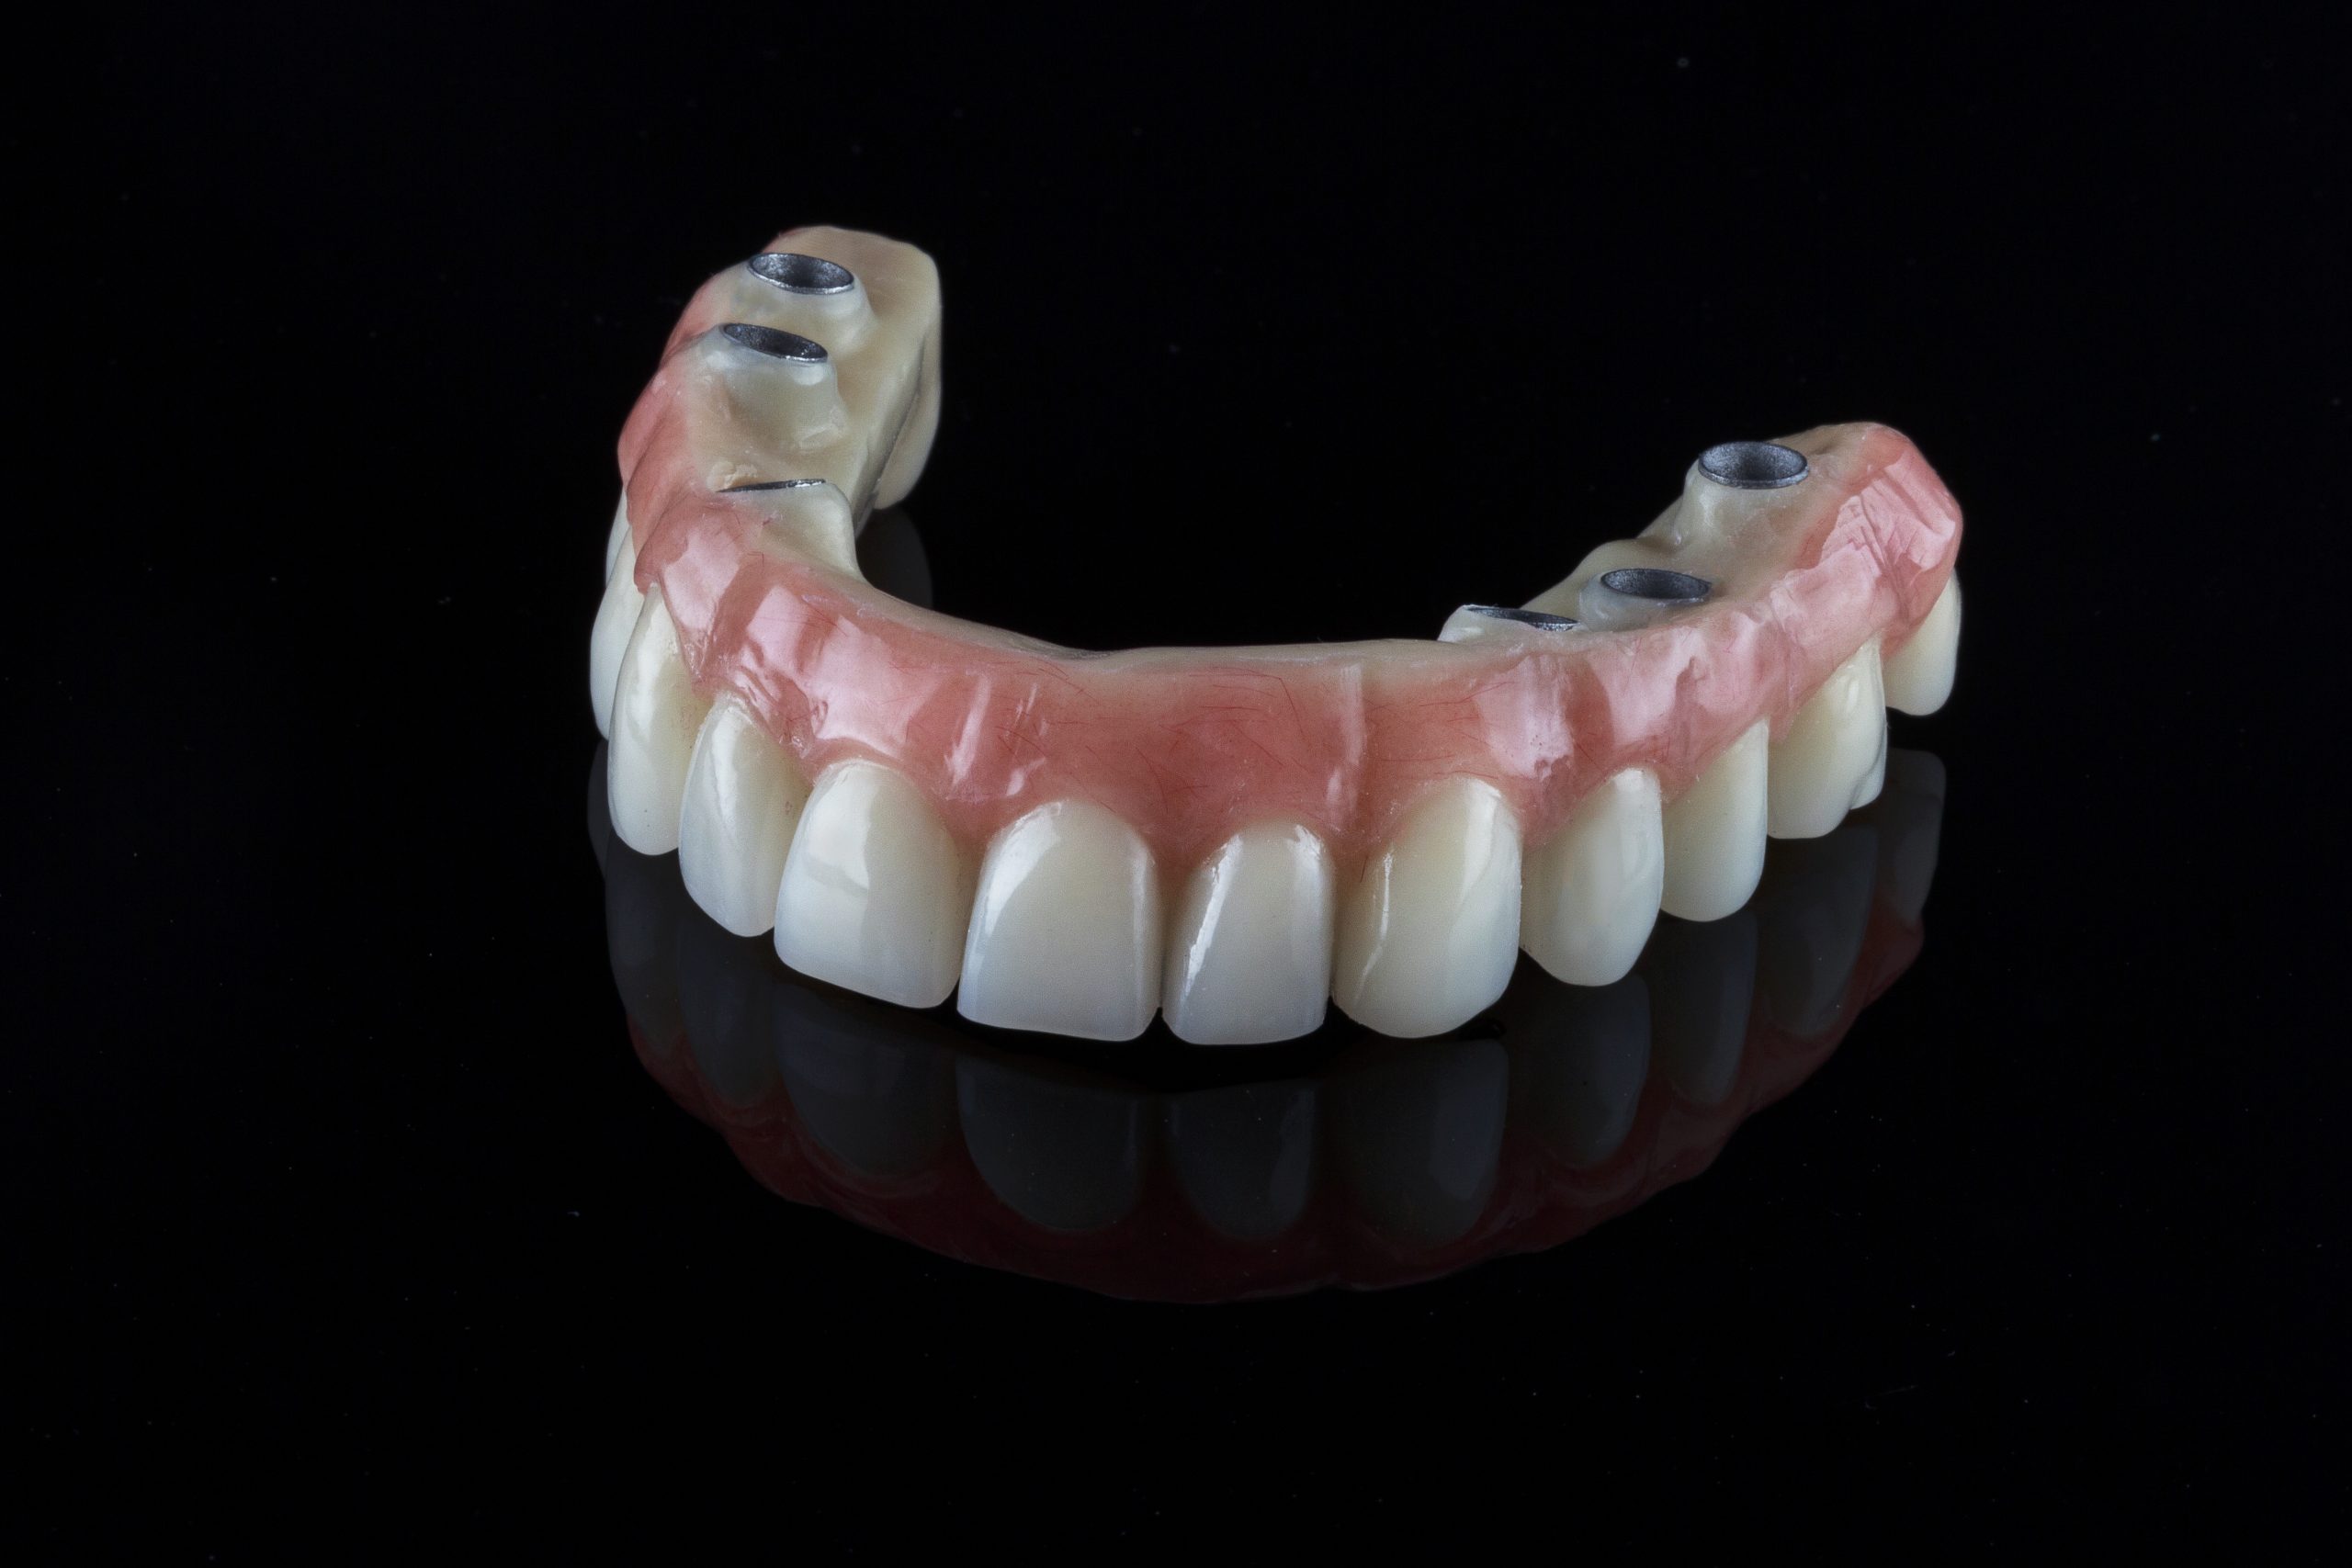 realistic dental permanent upper jaw prosthesis for a 50-year-old patient on a black background